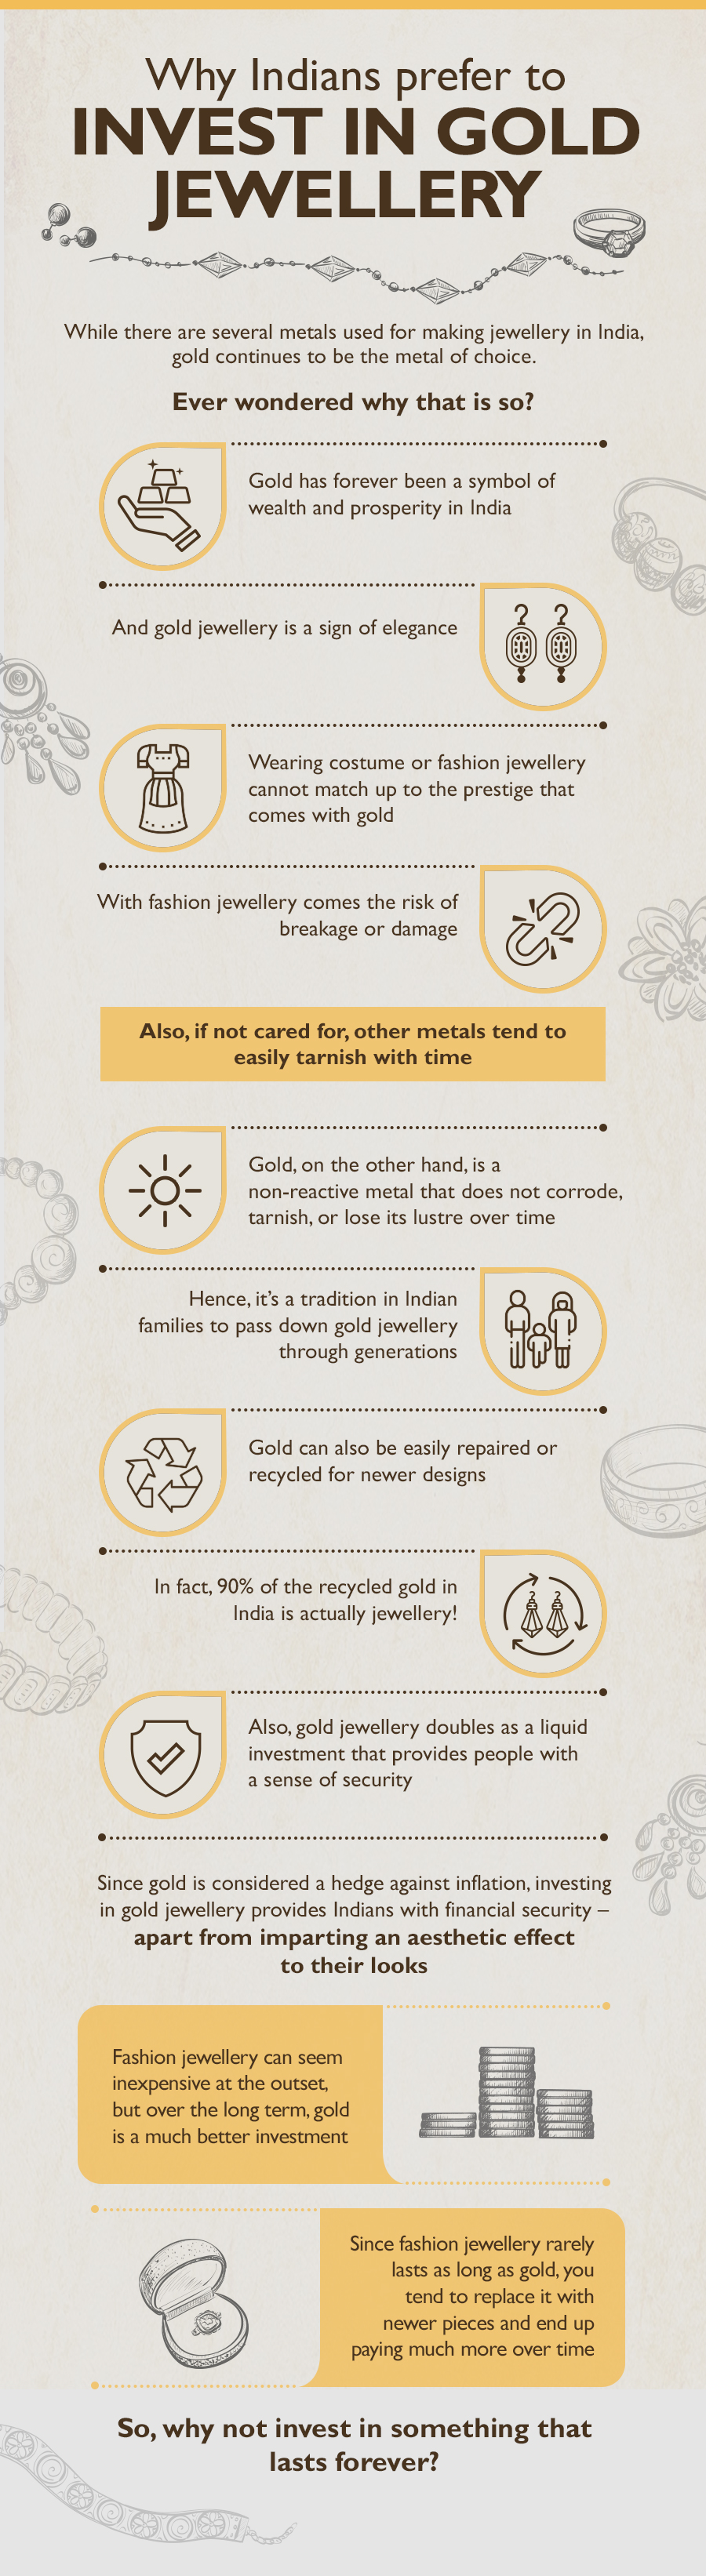 Know why Indians prefer to invest in gold jewellery